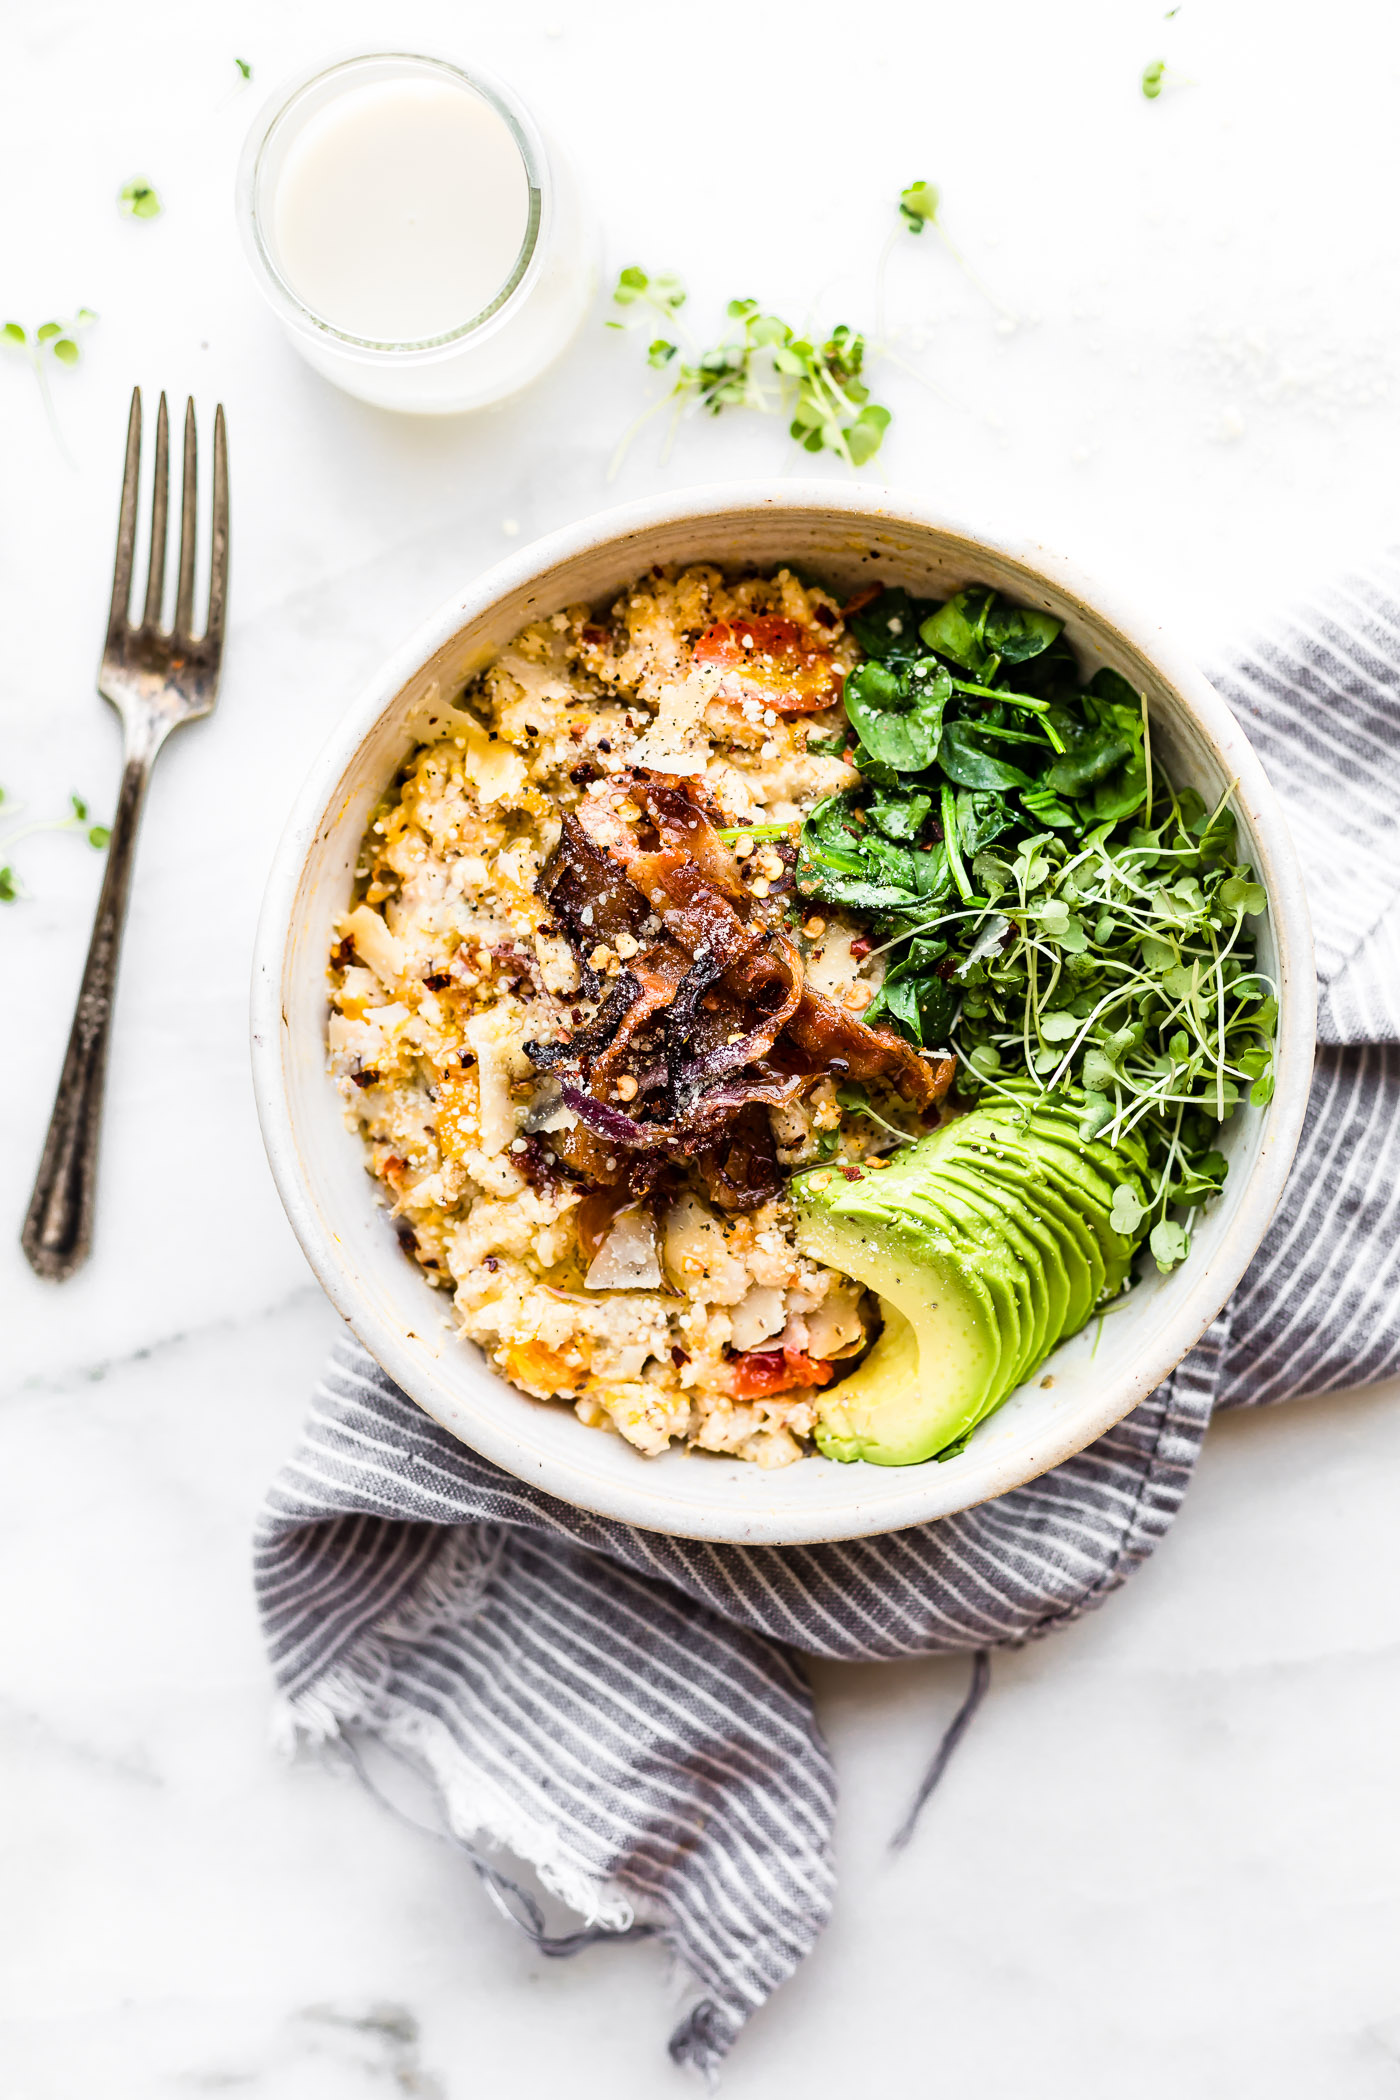 Serving of slow cooker oatmeal in stone bowl topped with crispy bacon, micro greens, and avocado slices.